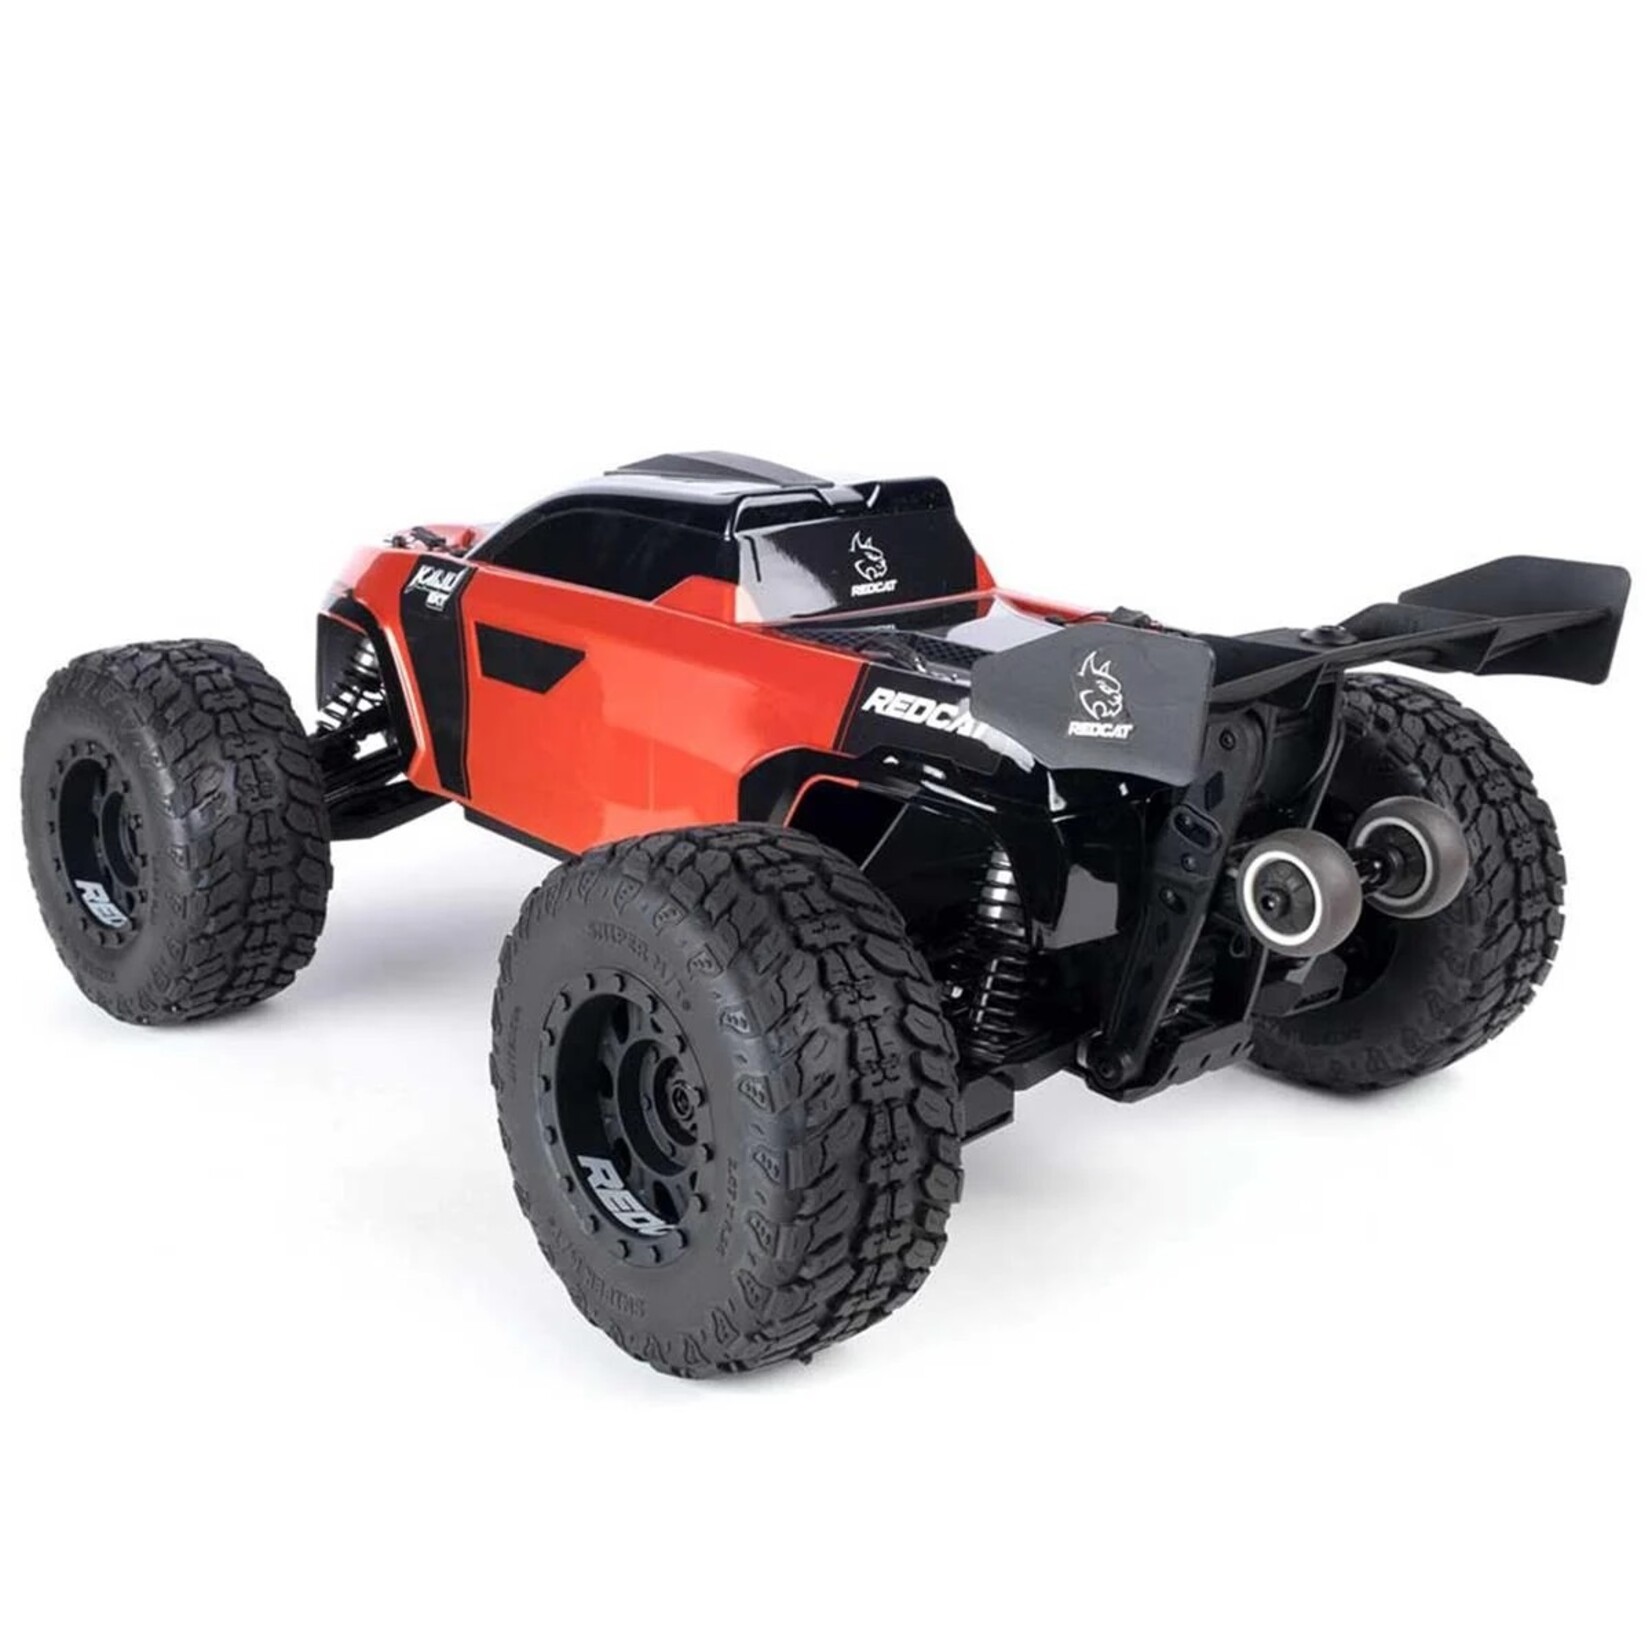 Redcat Racing Redcat Kaiju EXT 1/8 RTR 4WD 6S Brushless Monster Truck (Copper) w/2.4GHz Radio #RER14656